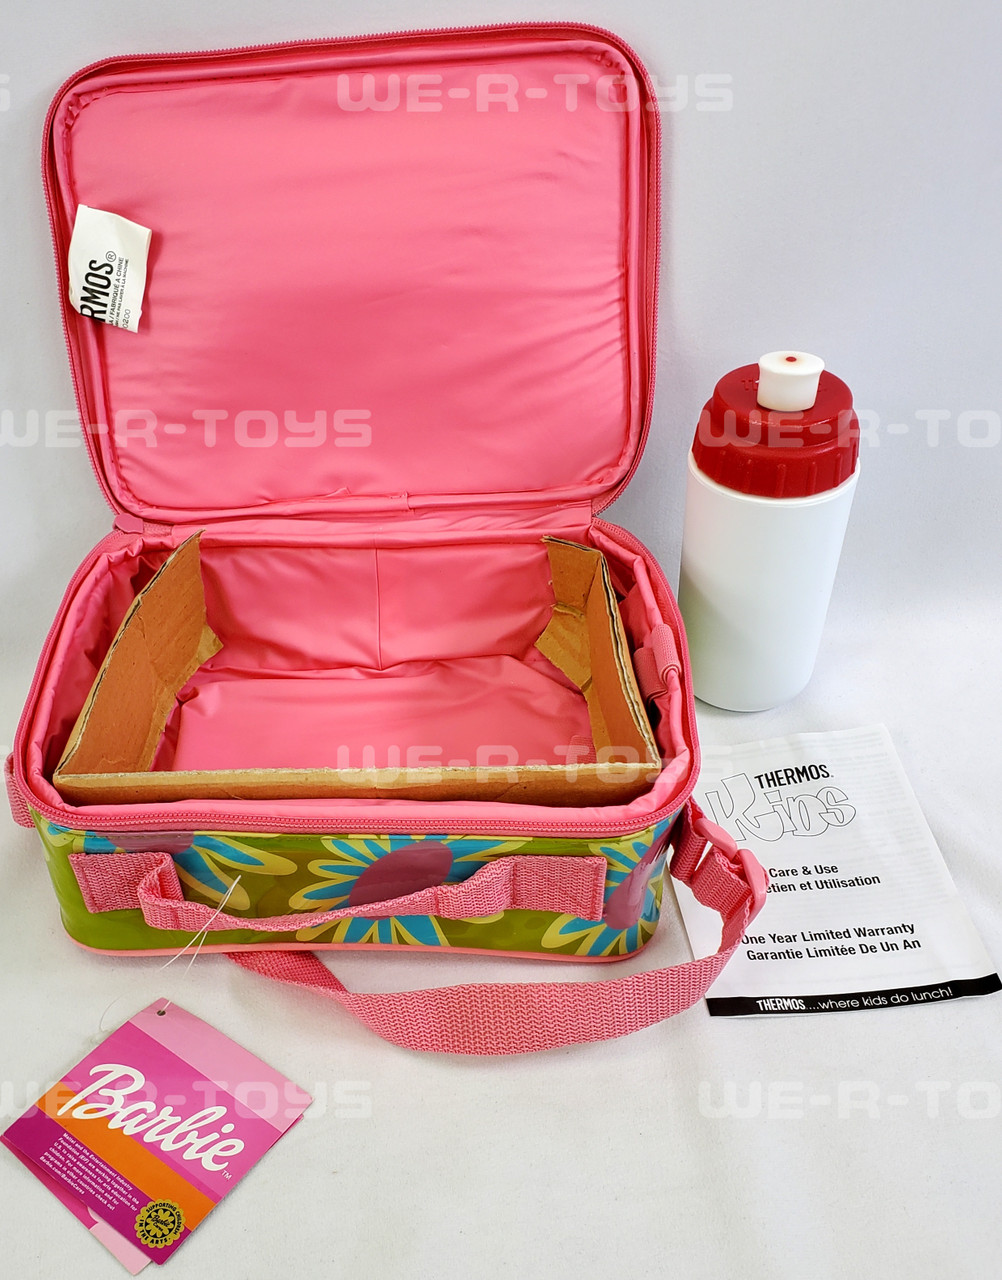 Barbie thermos lunch bag